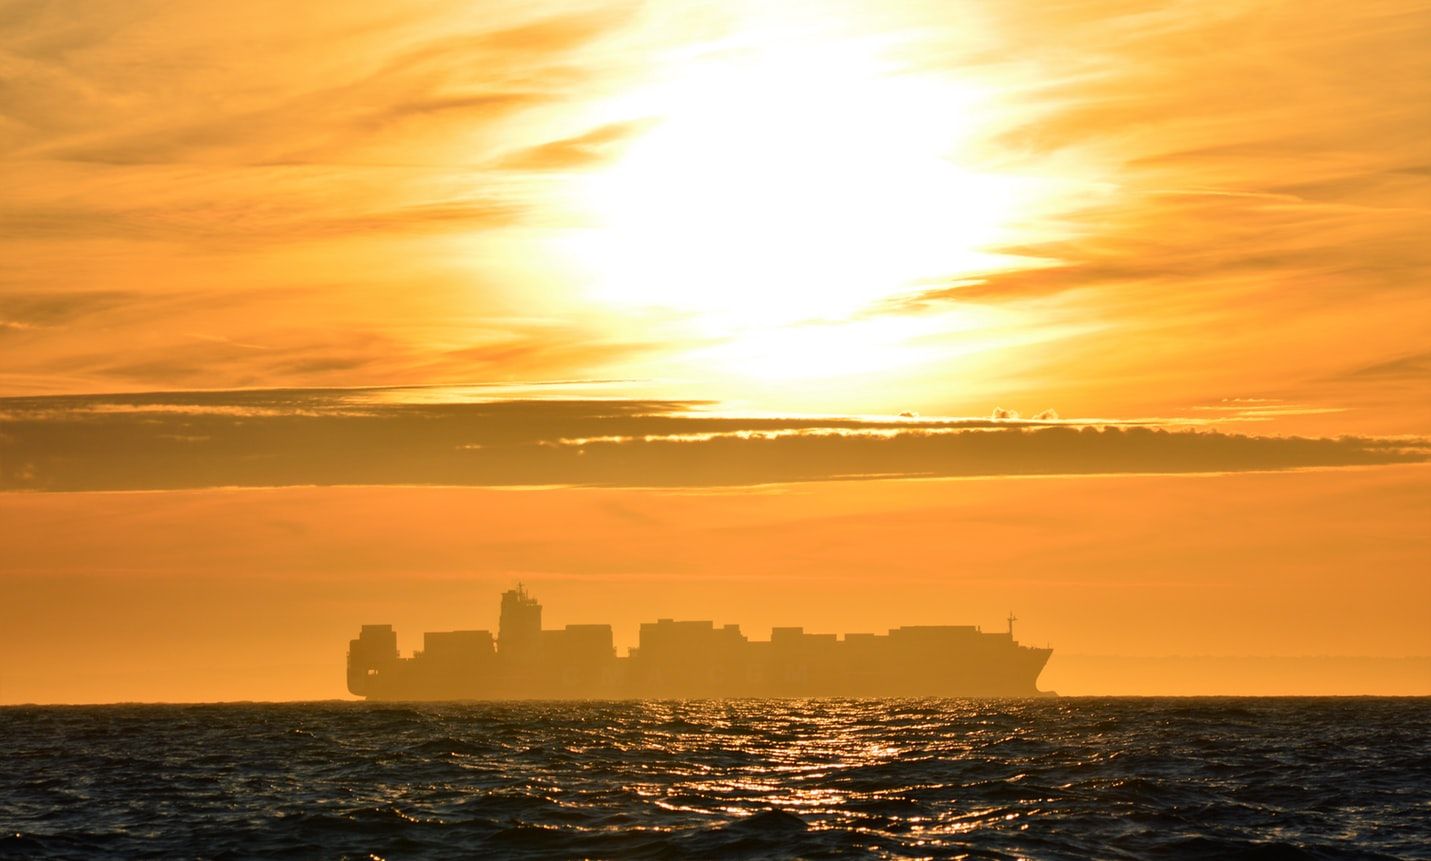 Silhouette of container ship at sunset